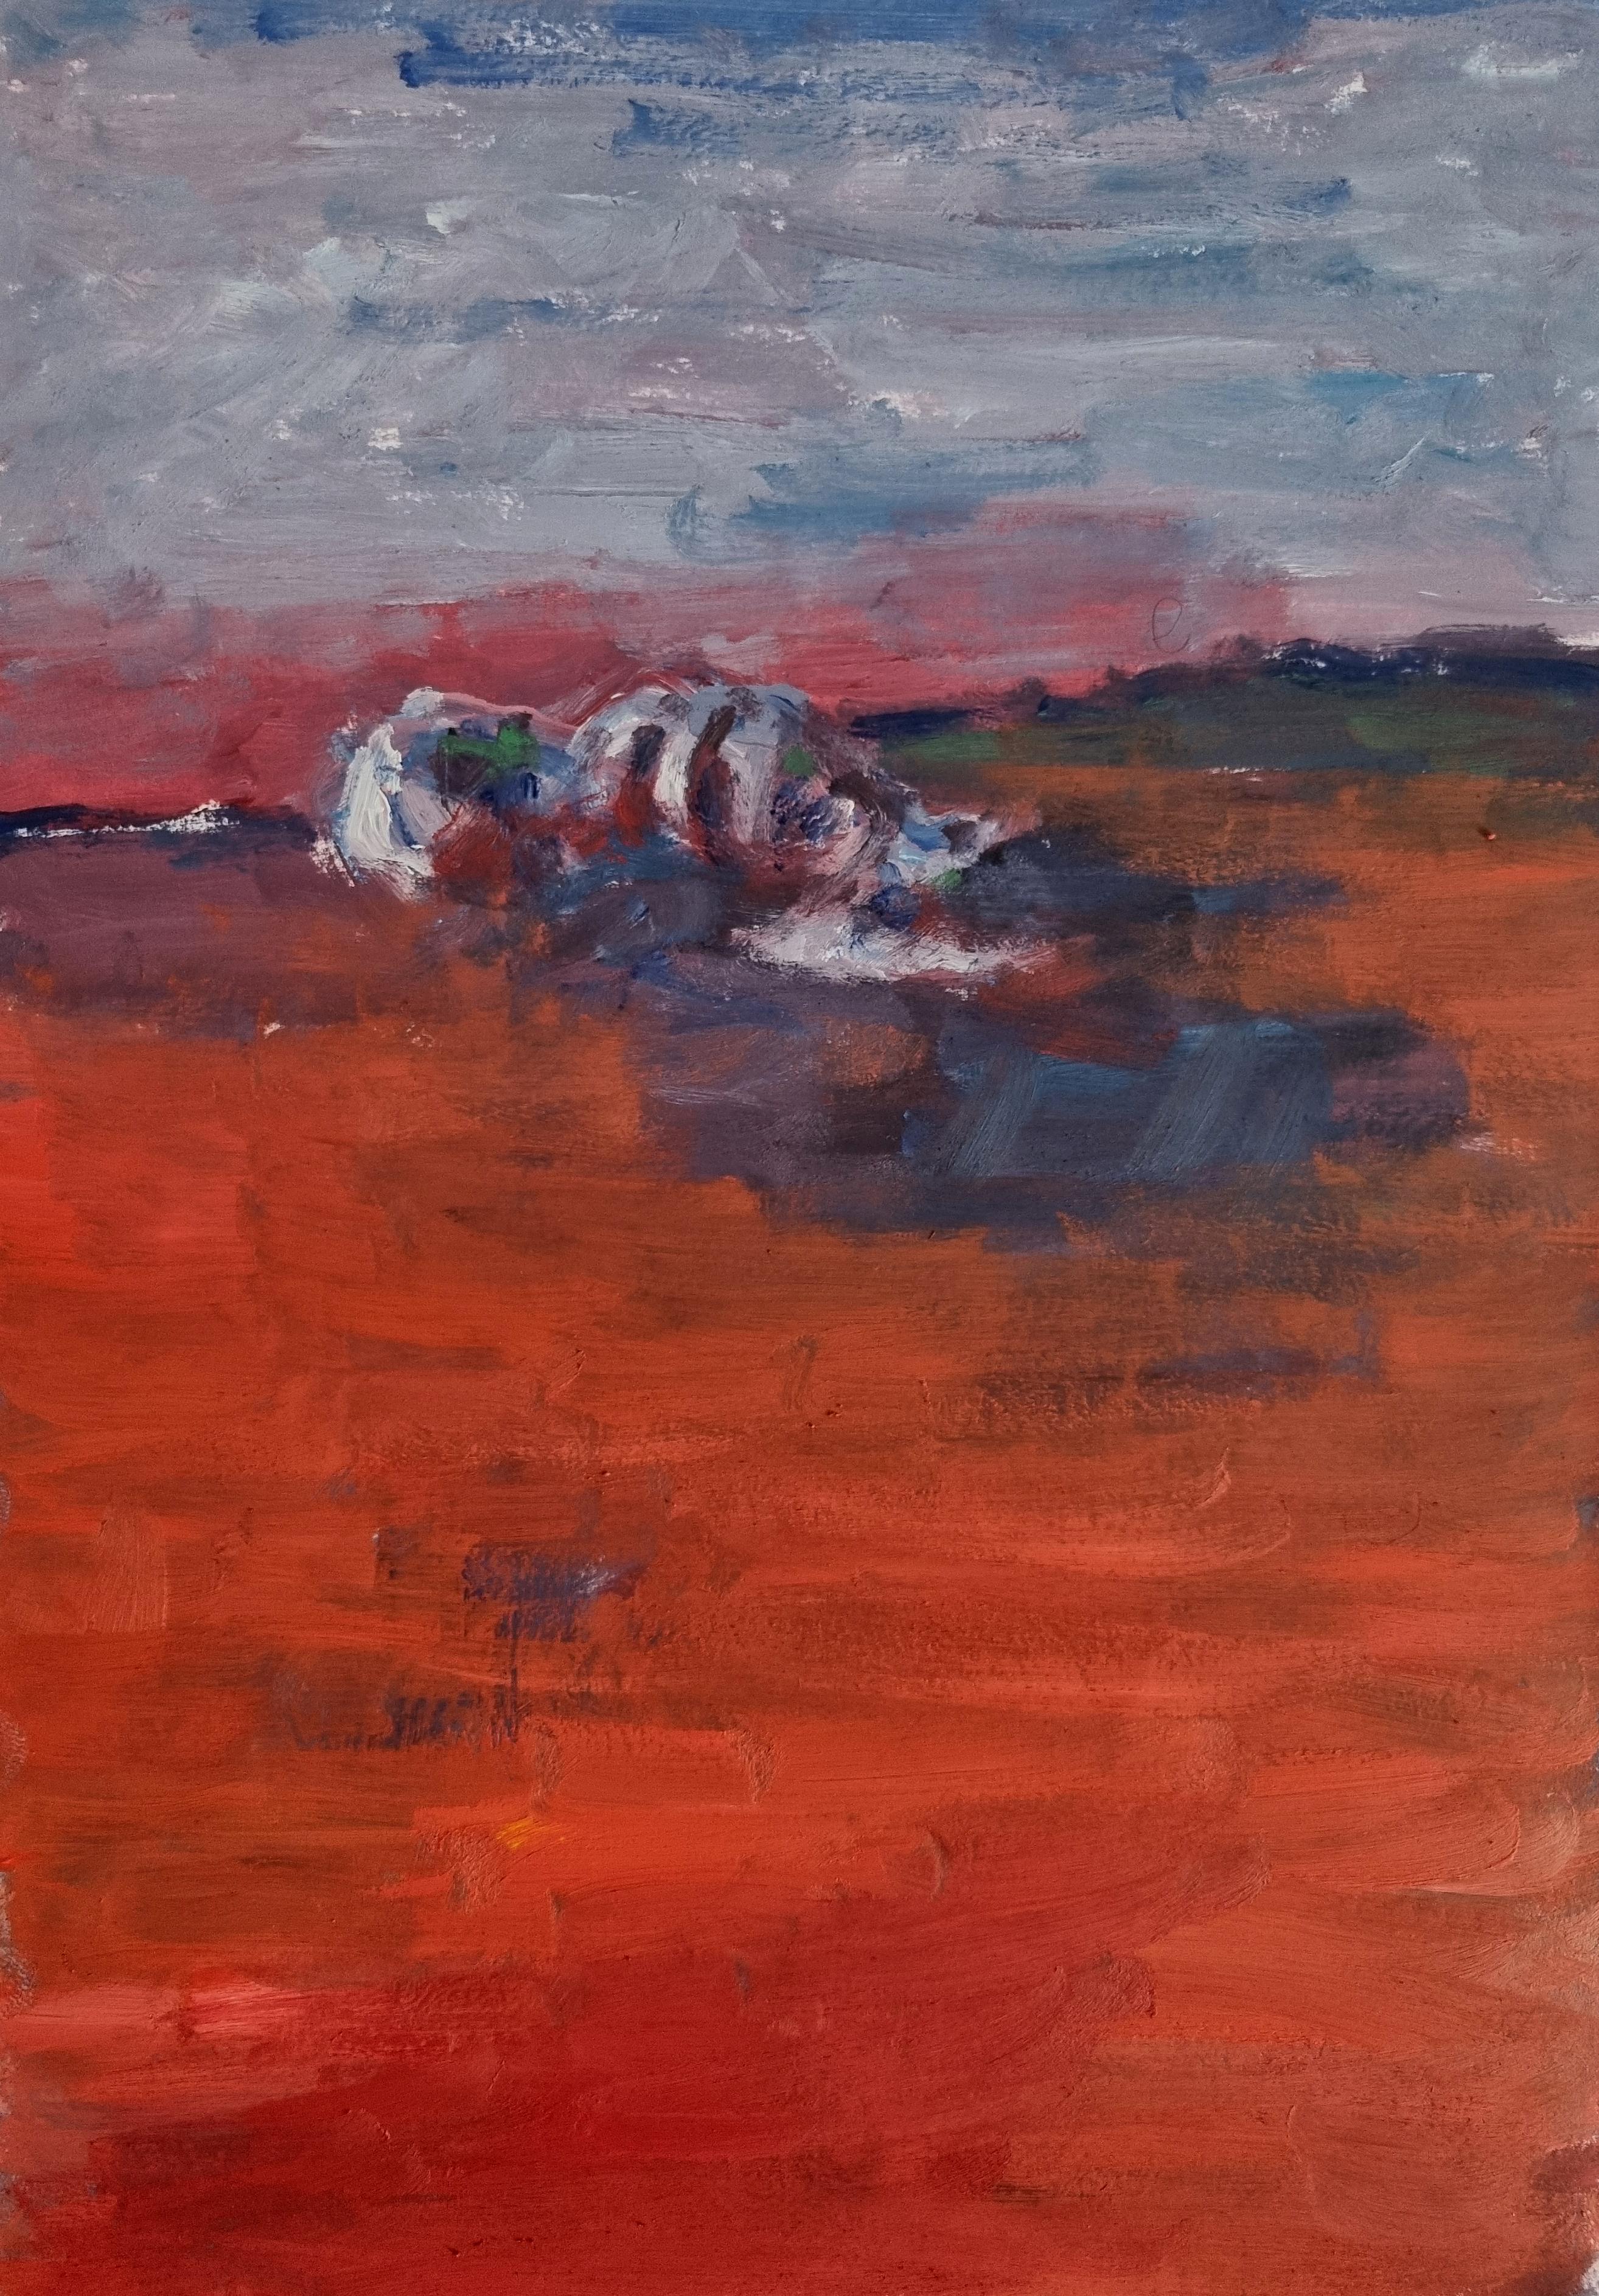 Remains (Body in the Field 1), 2022
oil on paper (signed on reverse)
16 17/32 H x 11 13/16 W in.
42 H x 30 W cm

Zsolt Berszán embodies in his works the dissolution of the human body through the prism of the fragment, the body in pieces, and the